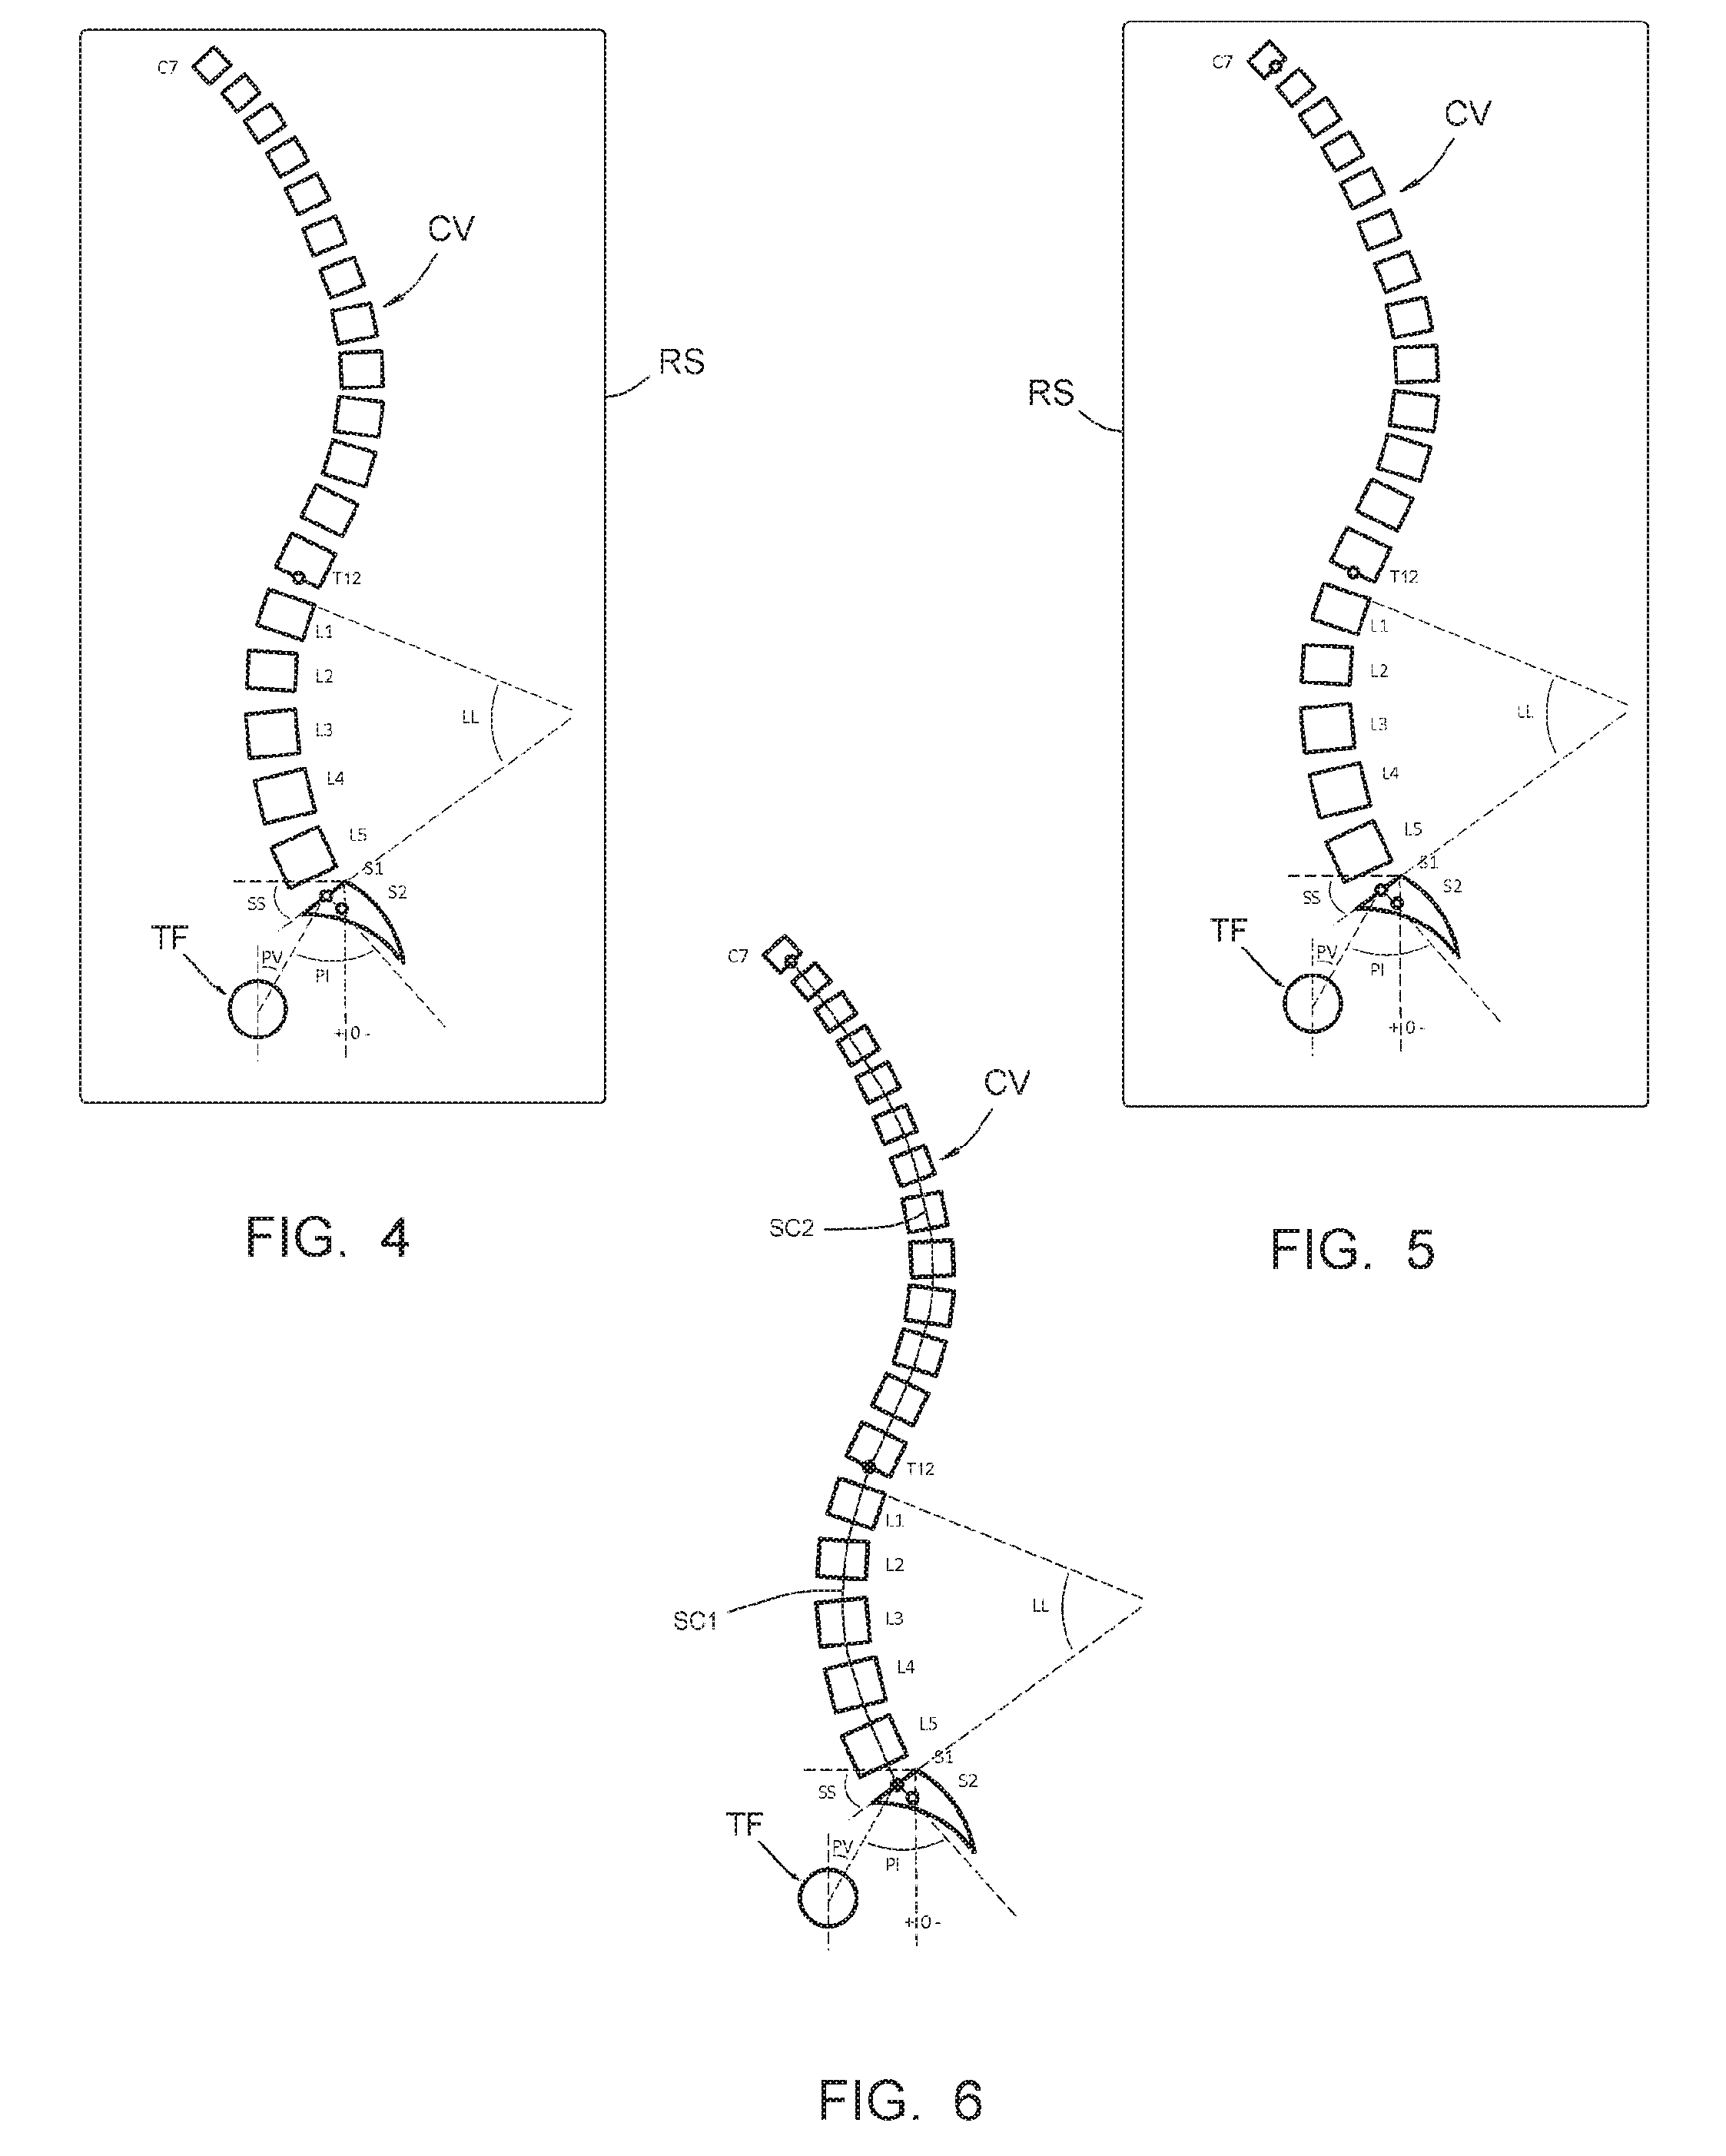 Method making it possible to produce the ideal curvature of a rod of vertebral osteosynthesis material designed to support a patient vertebral column